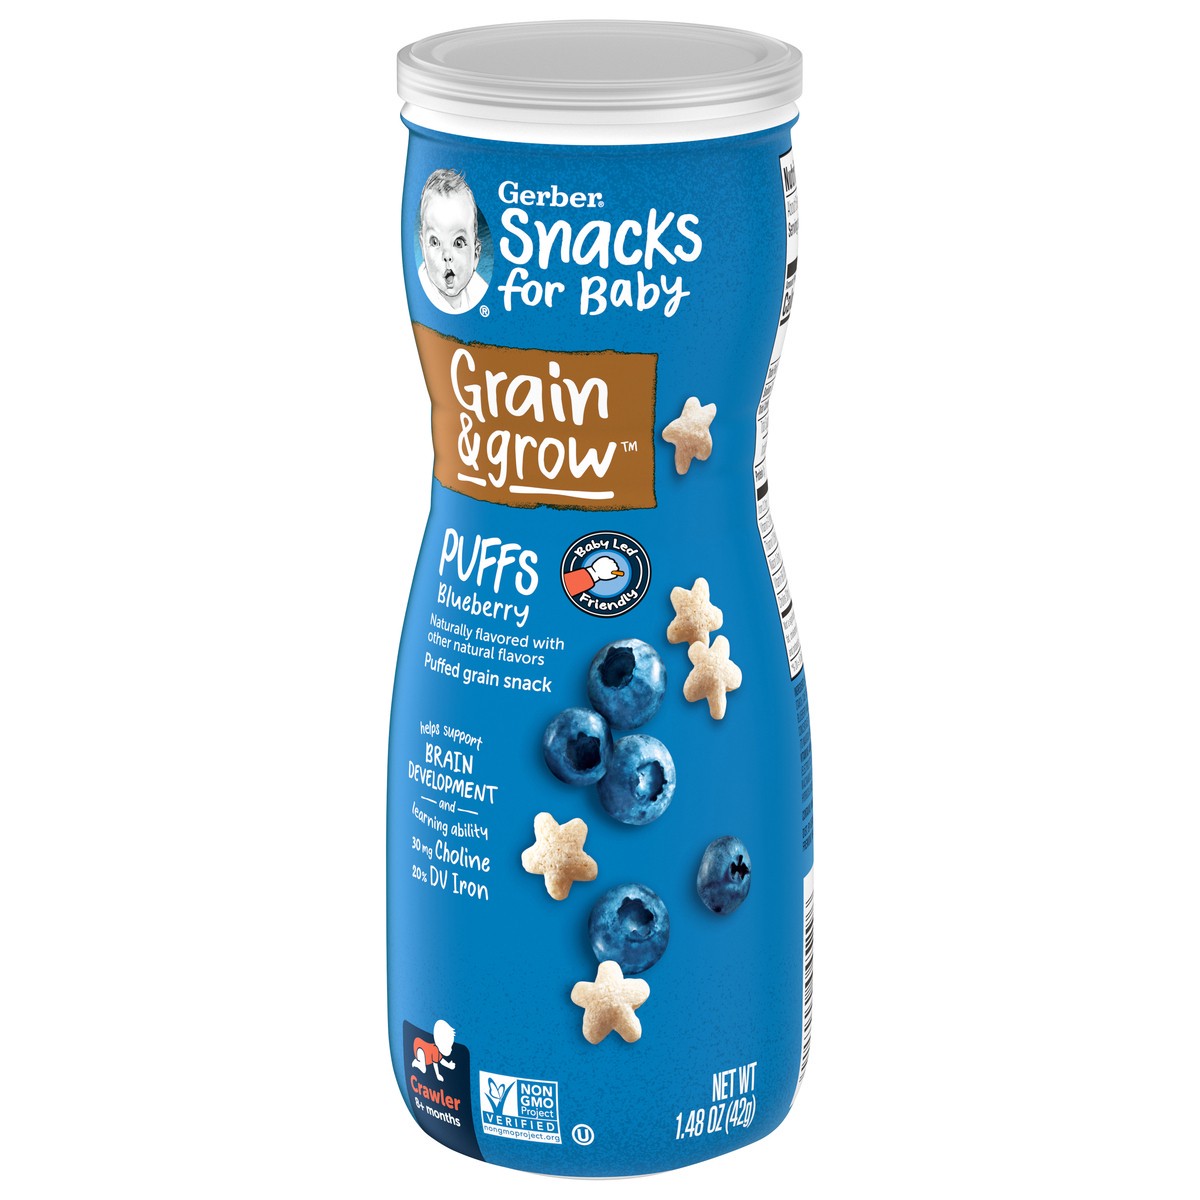 slide 2 of 9, Gerber Snacks for Baby Grain & Grow Puffs, Blueberry, 1.48 oz Canister, 1.48 oz